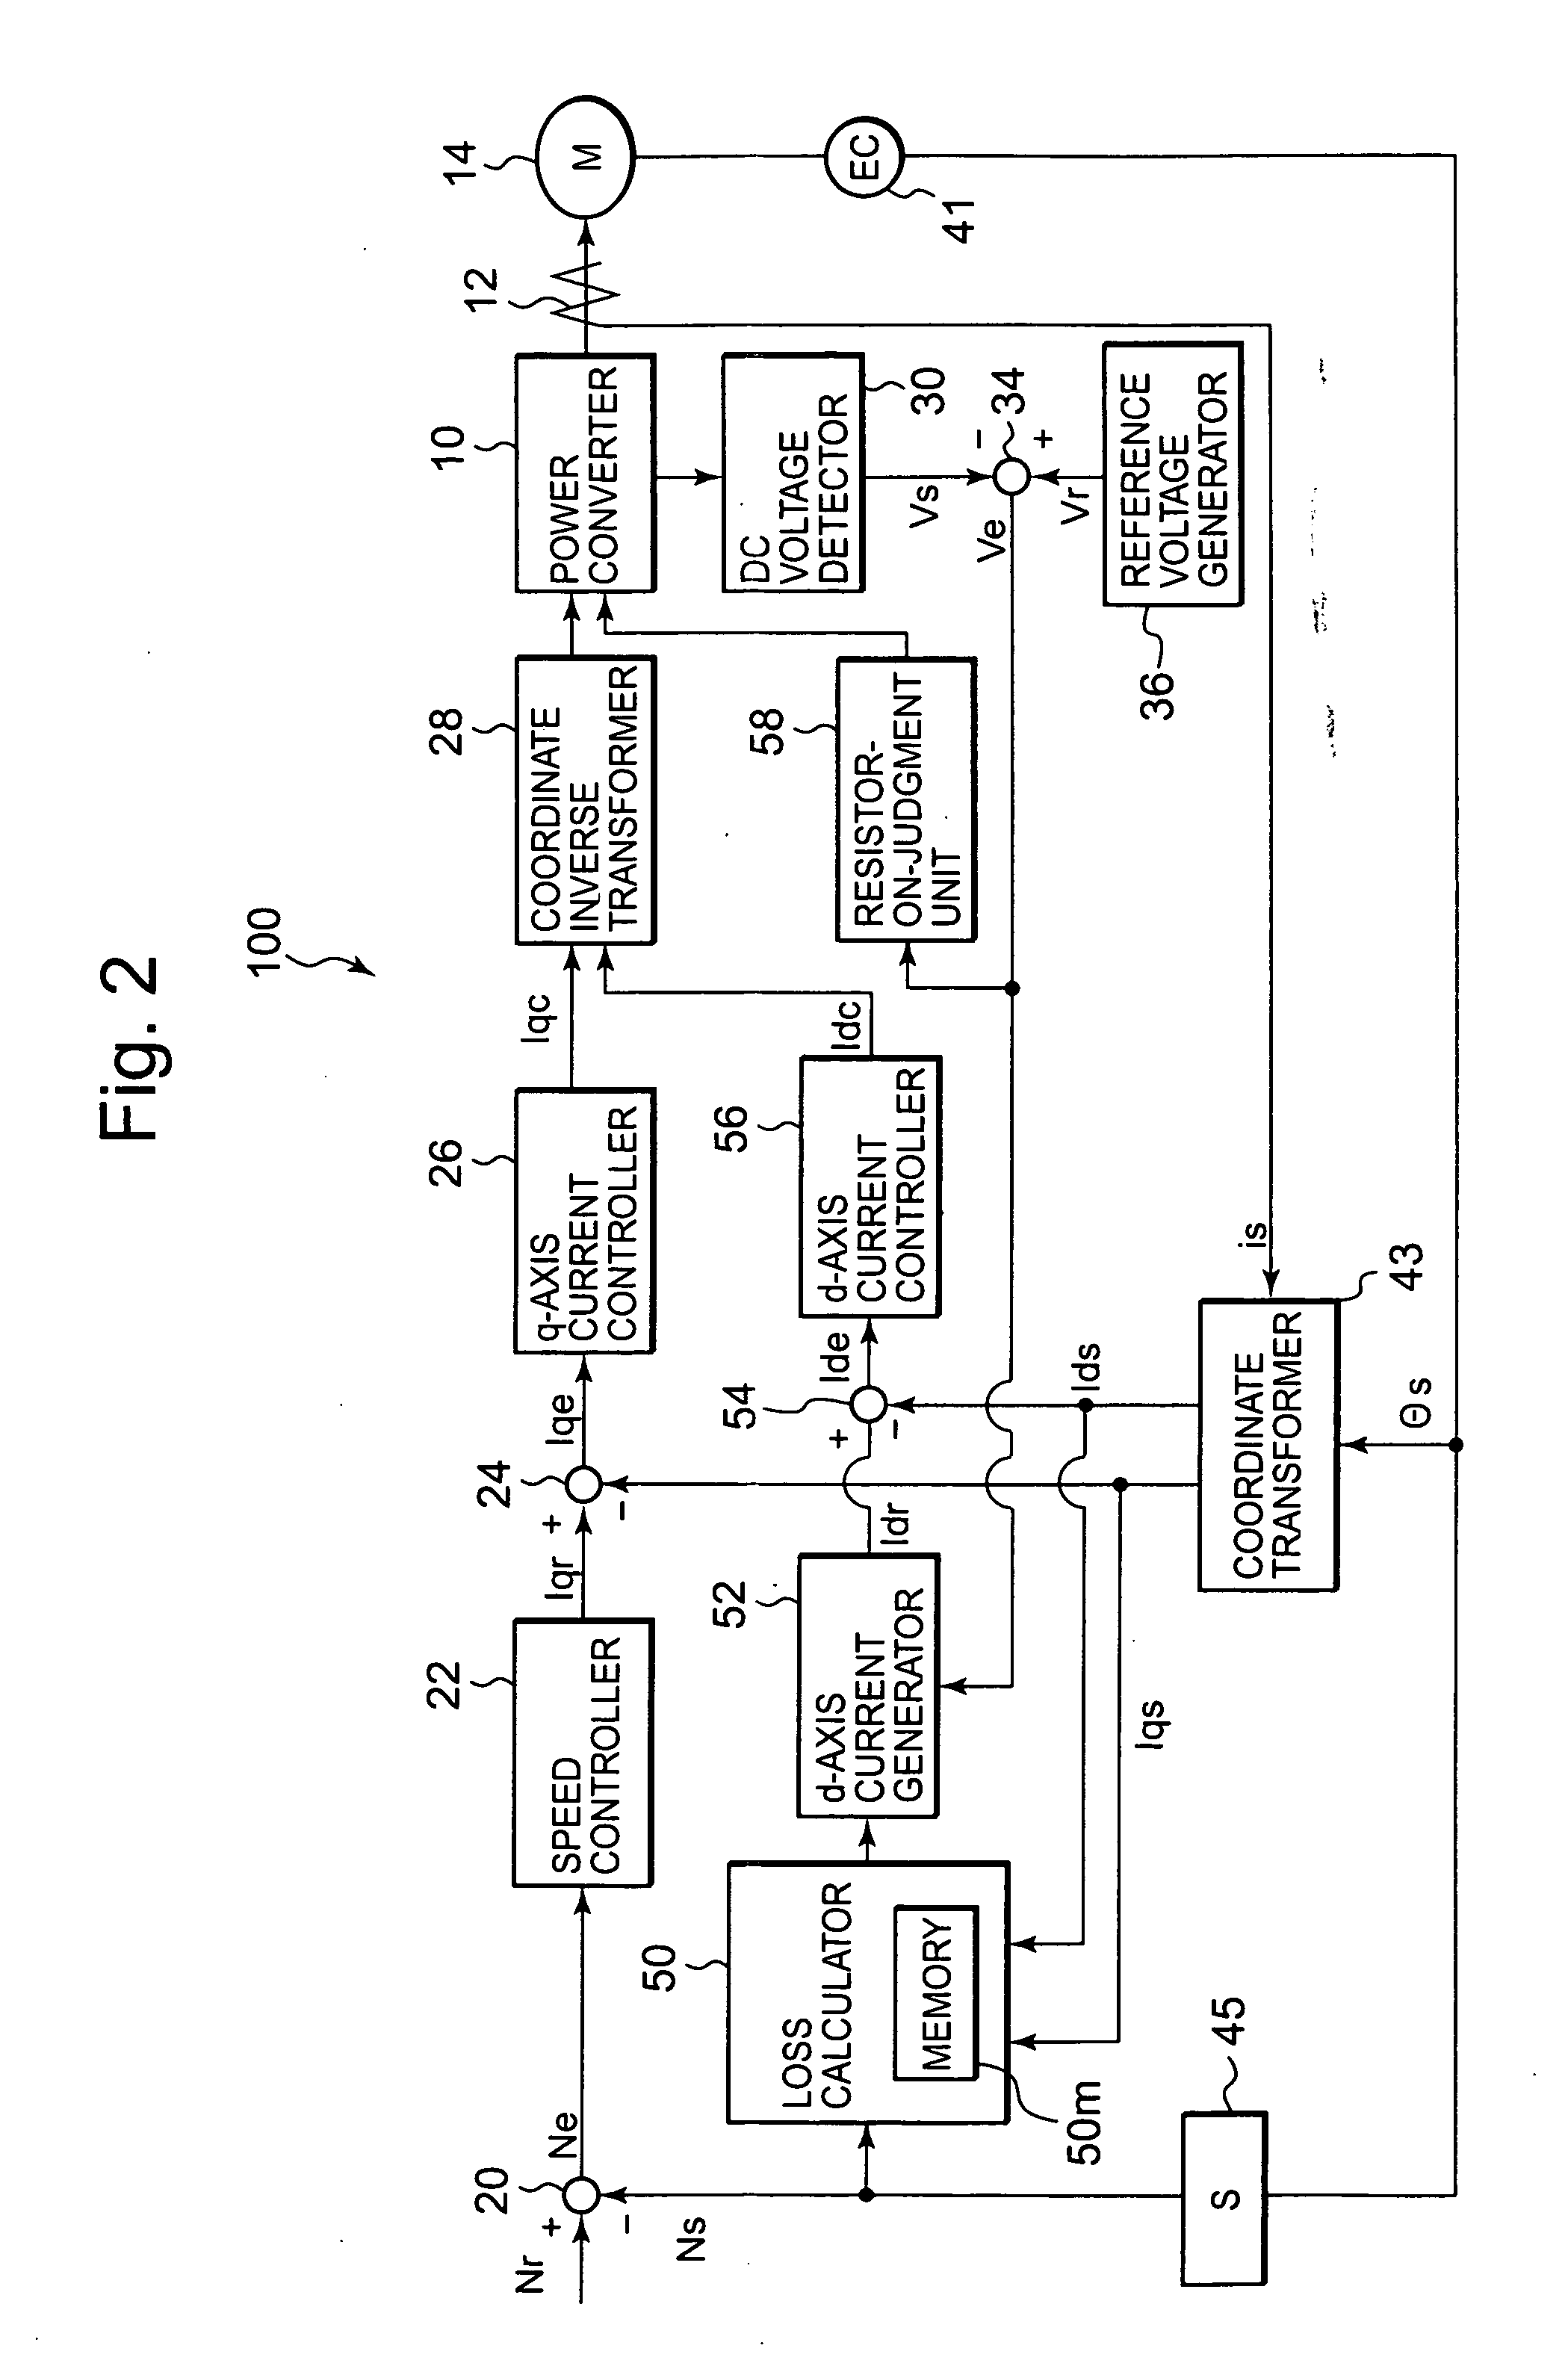 Control device for permanent magnet synchronous motor